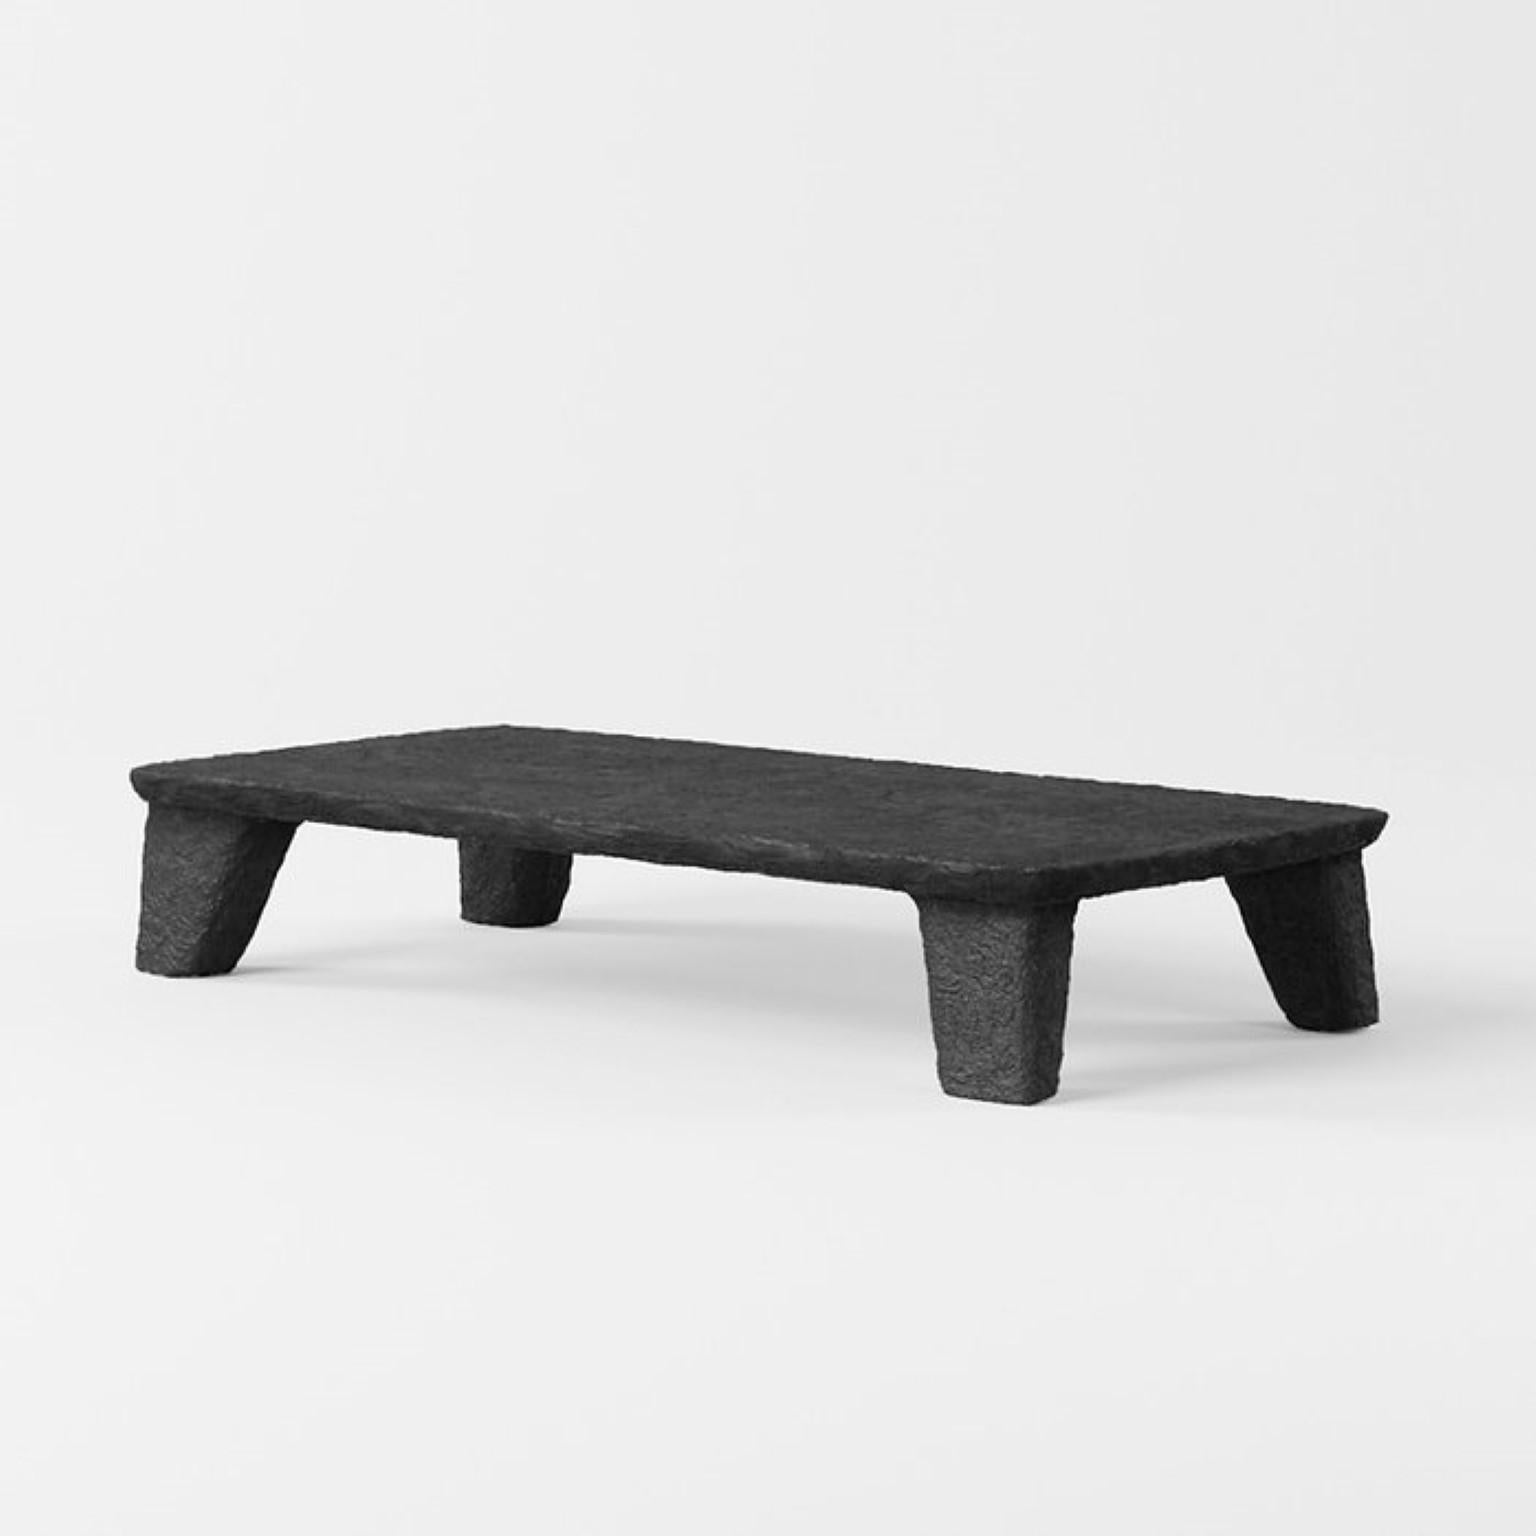 Ukrainian Set of 2 Ztista Low Tables by Faina